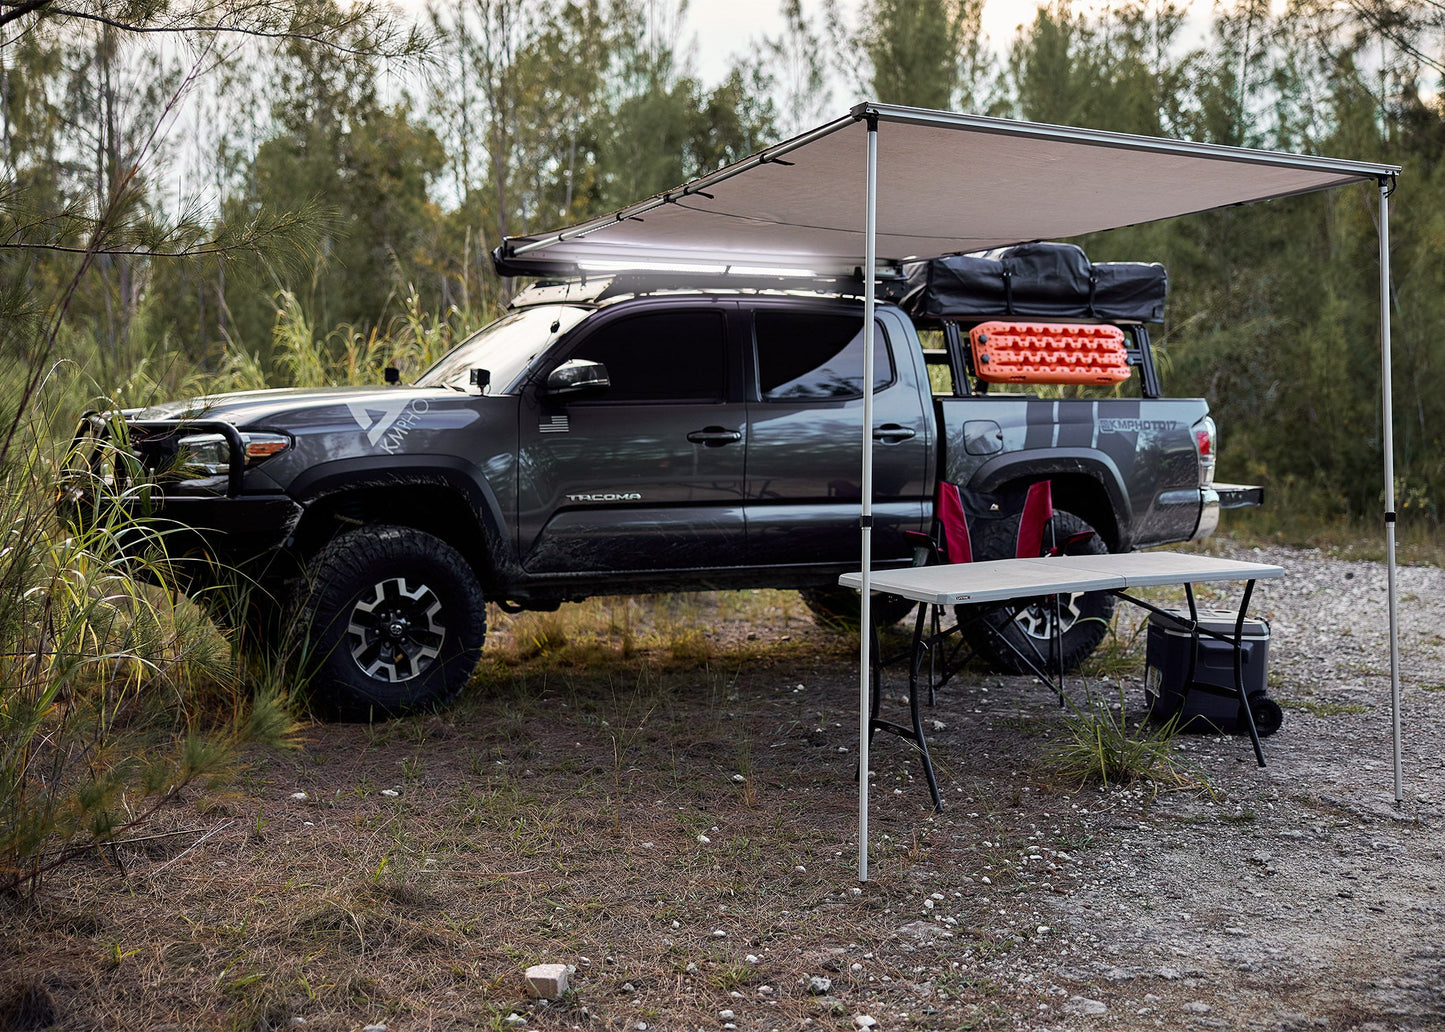 Dobinsons 4x4 Roll Out Awning 8FT x 9.8FT Large Size with LED Lights (CE80-3904)